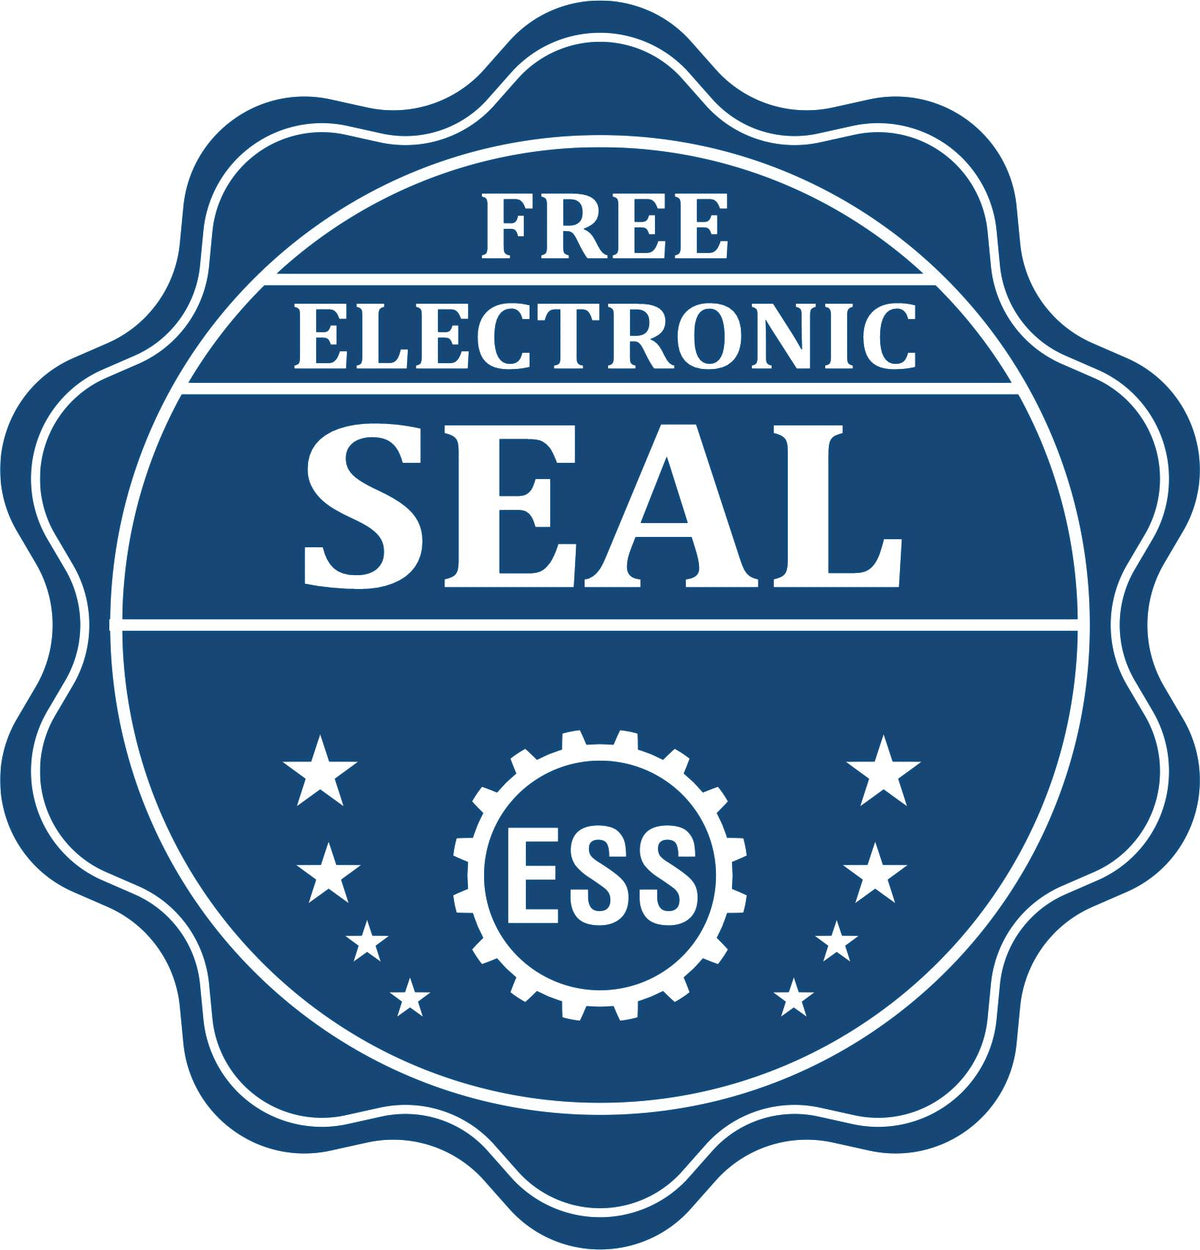 A badge showing a free electronic seal for the Slim Pre-Inked Connecticut Professional Geologist Seal Stamp with stars and the ESS gear on the emblem.